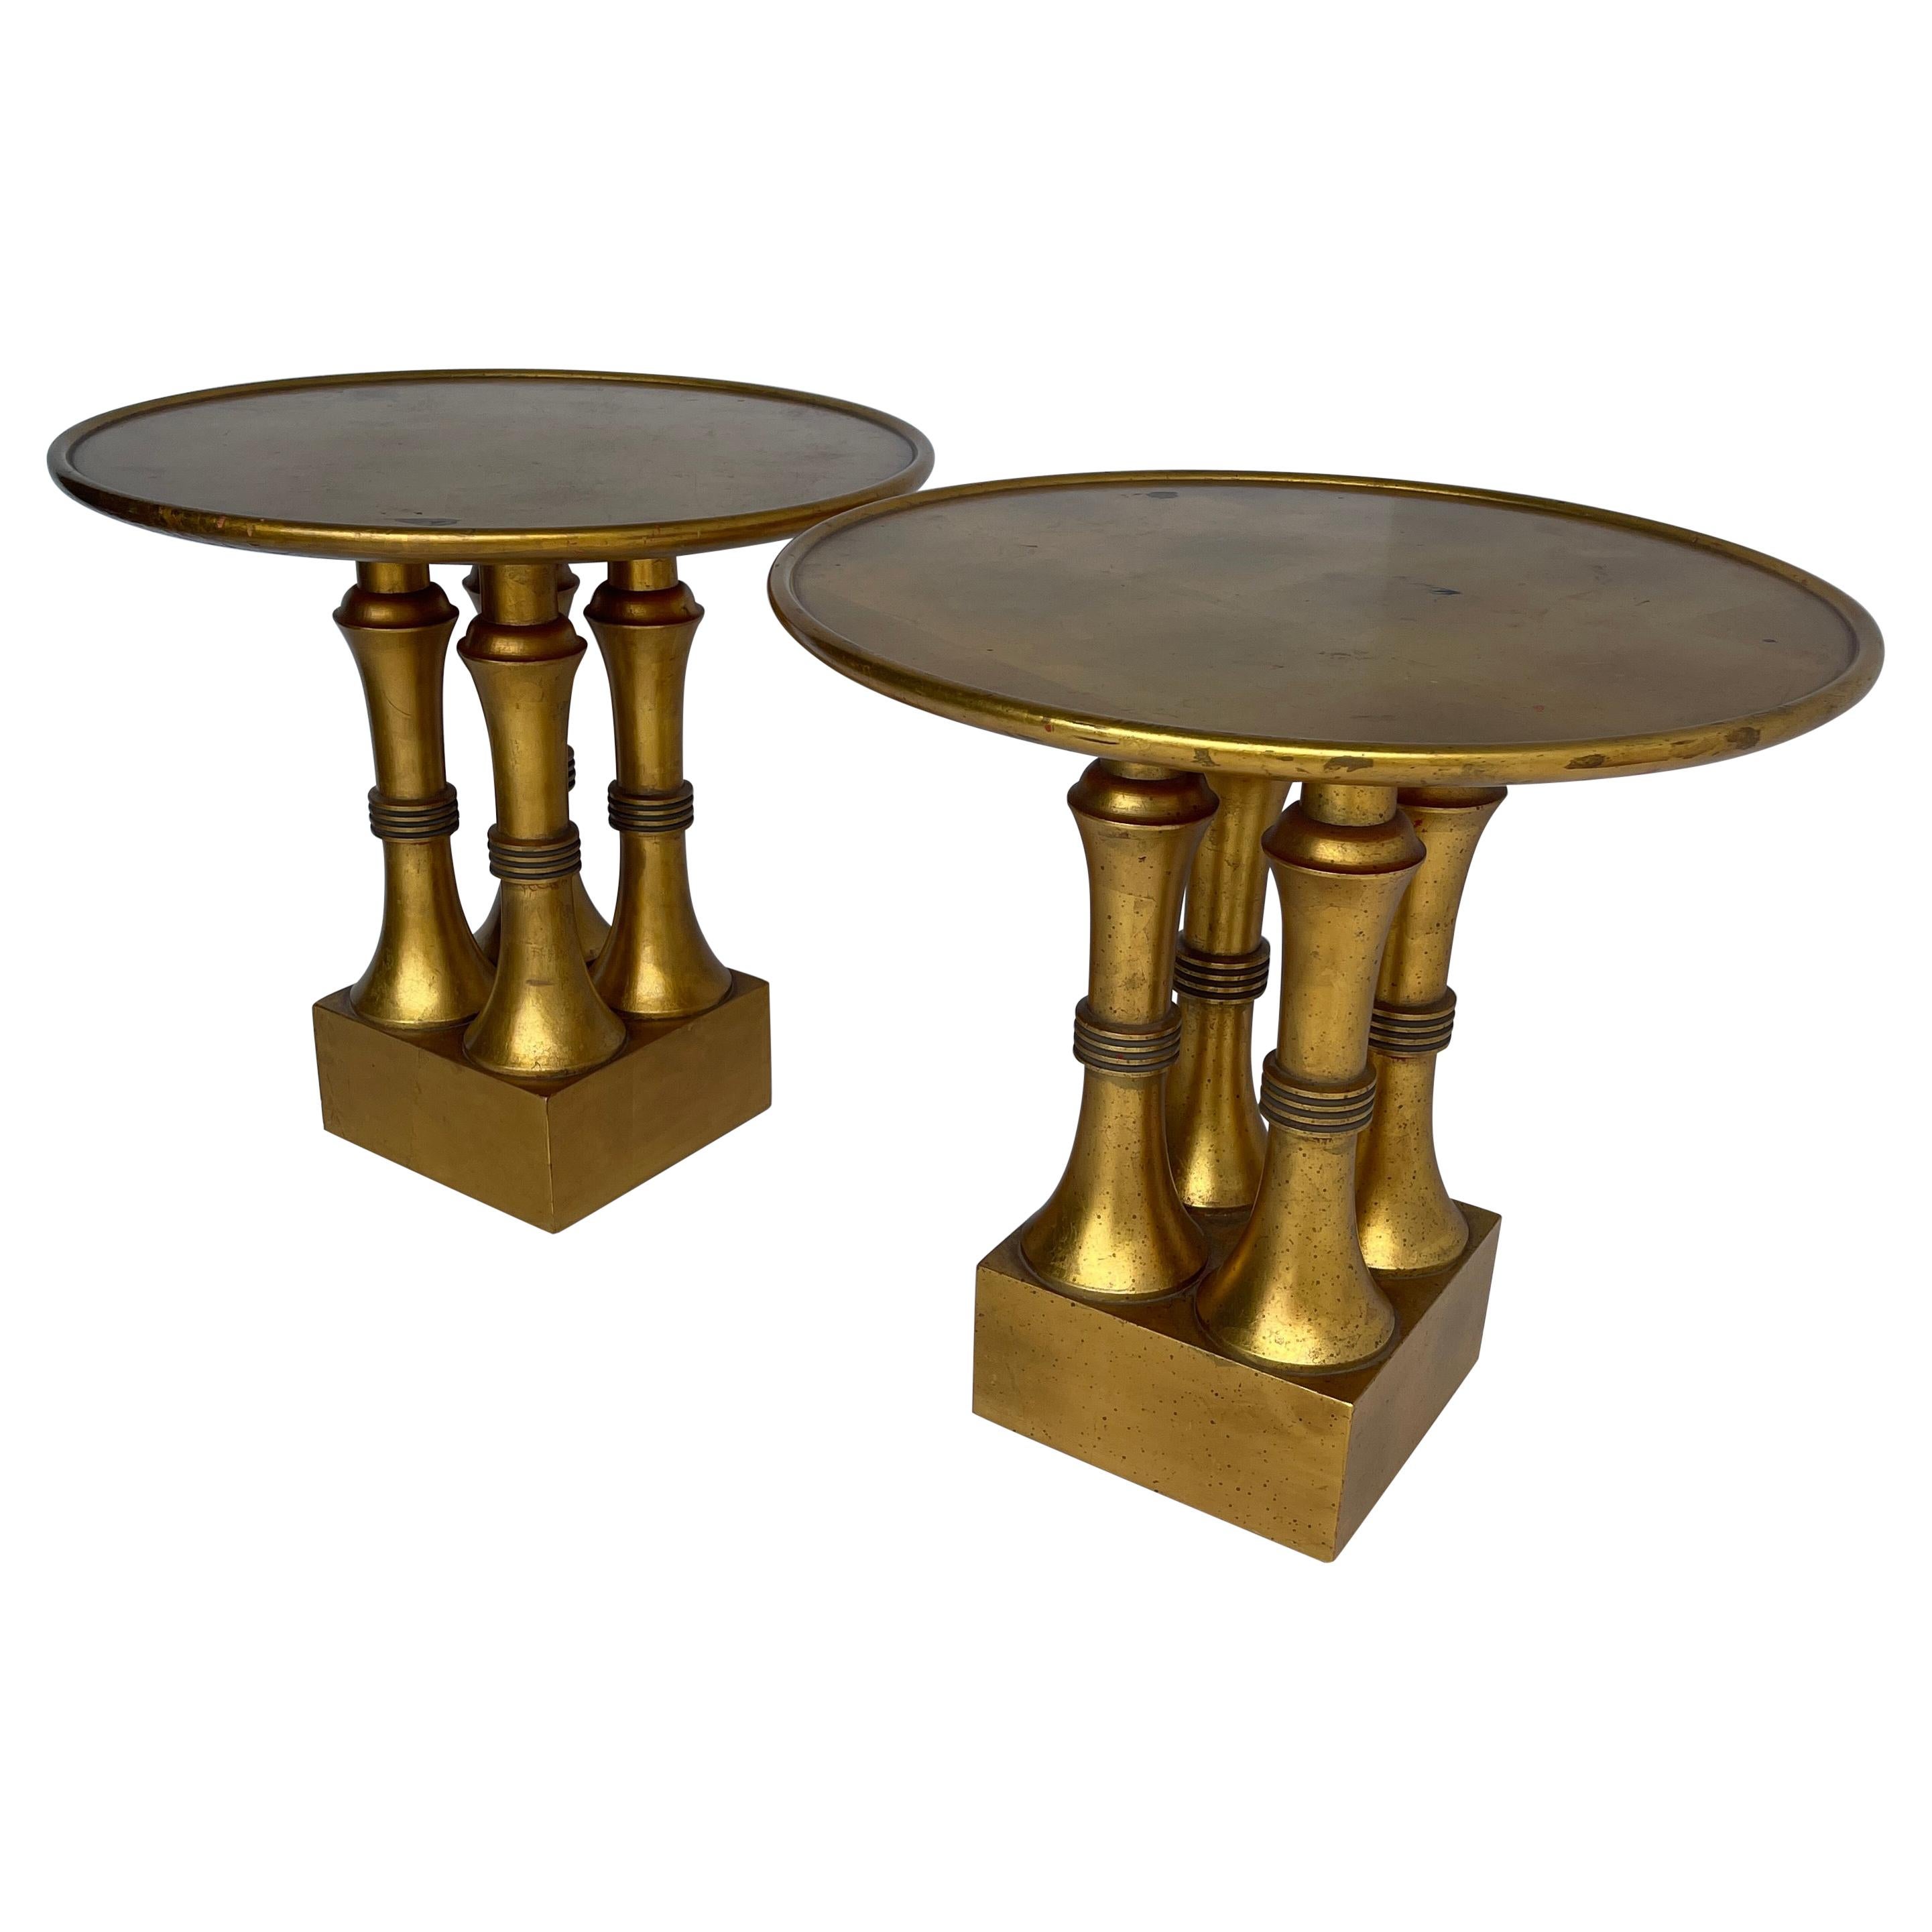 Pair of Gold Leaf and Red Lacquer Side Tables, Hollywood Regency